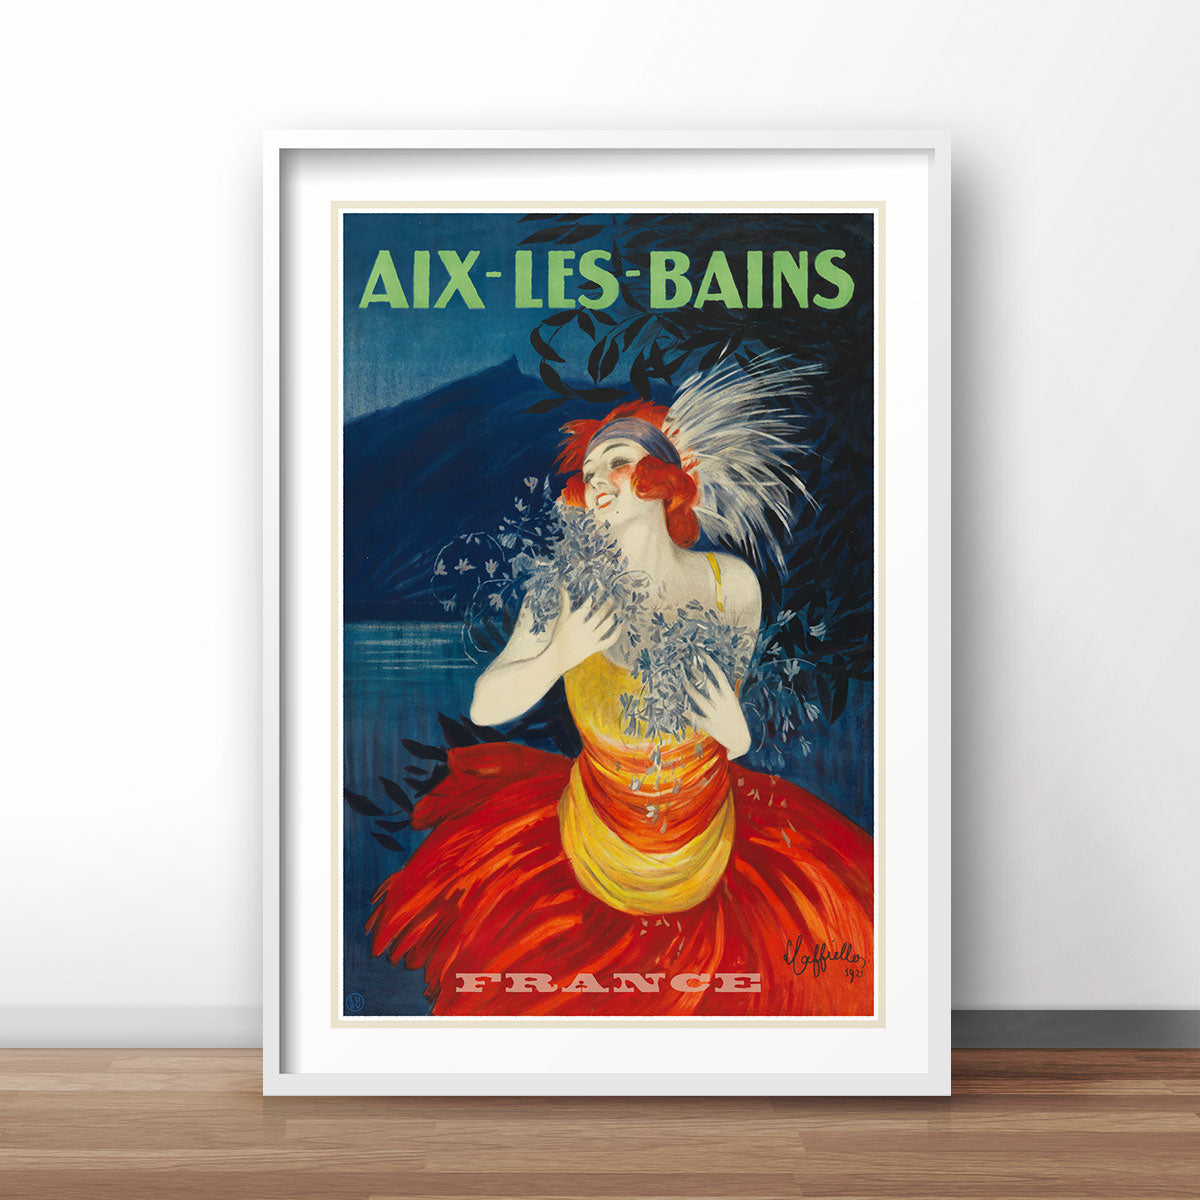 Aix les bains France vintage travel poster from Places We Luv